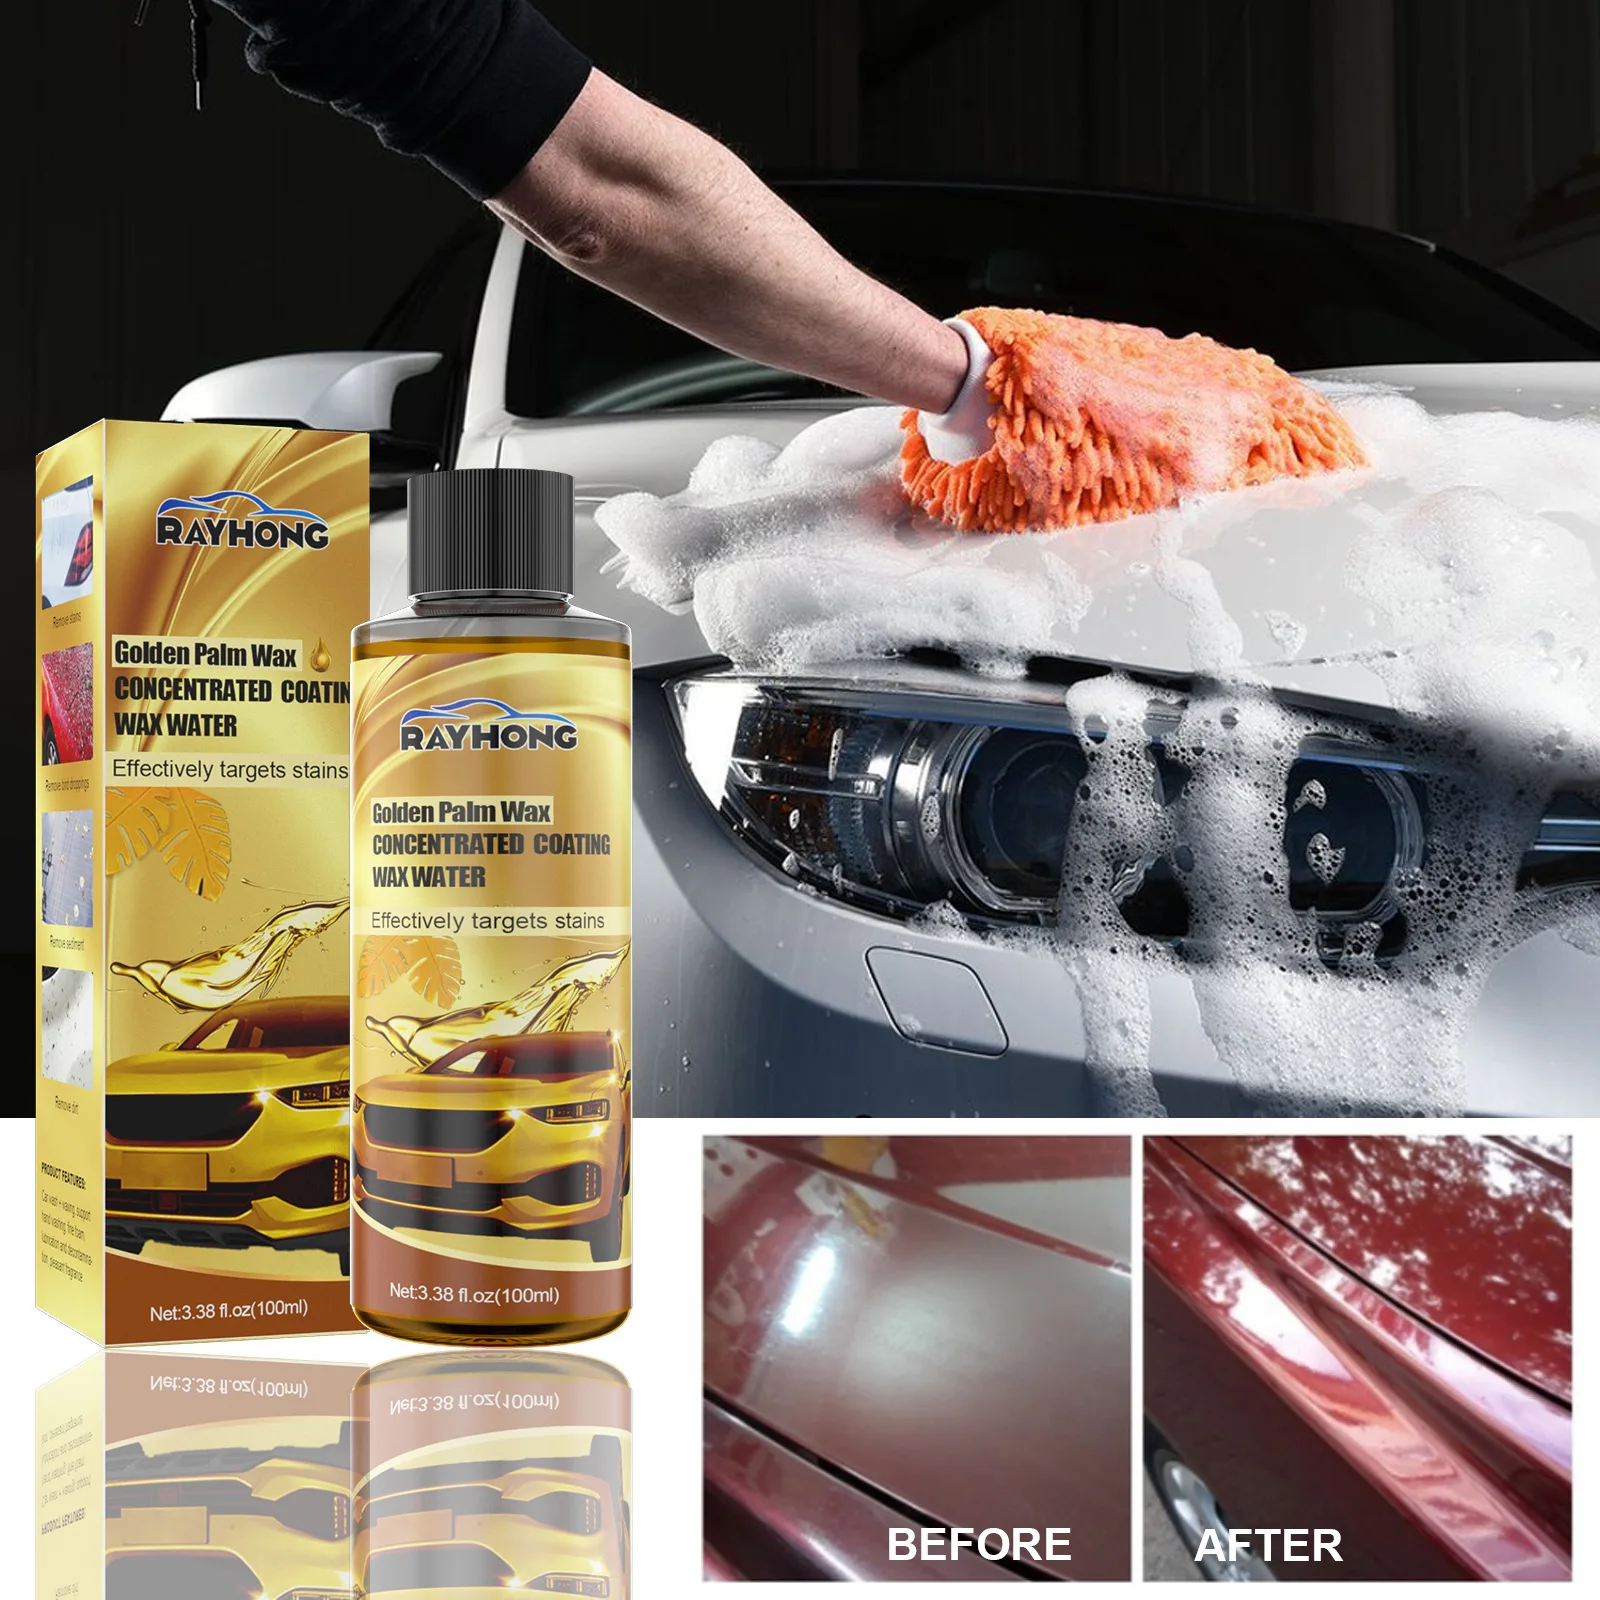 

Car Wash Wax Water Maintainance Car Golden Palm Brown Wax Concentrated Coating Wax Water Foam Cleaner Decontamination Coating